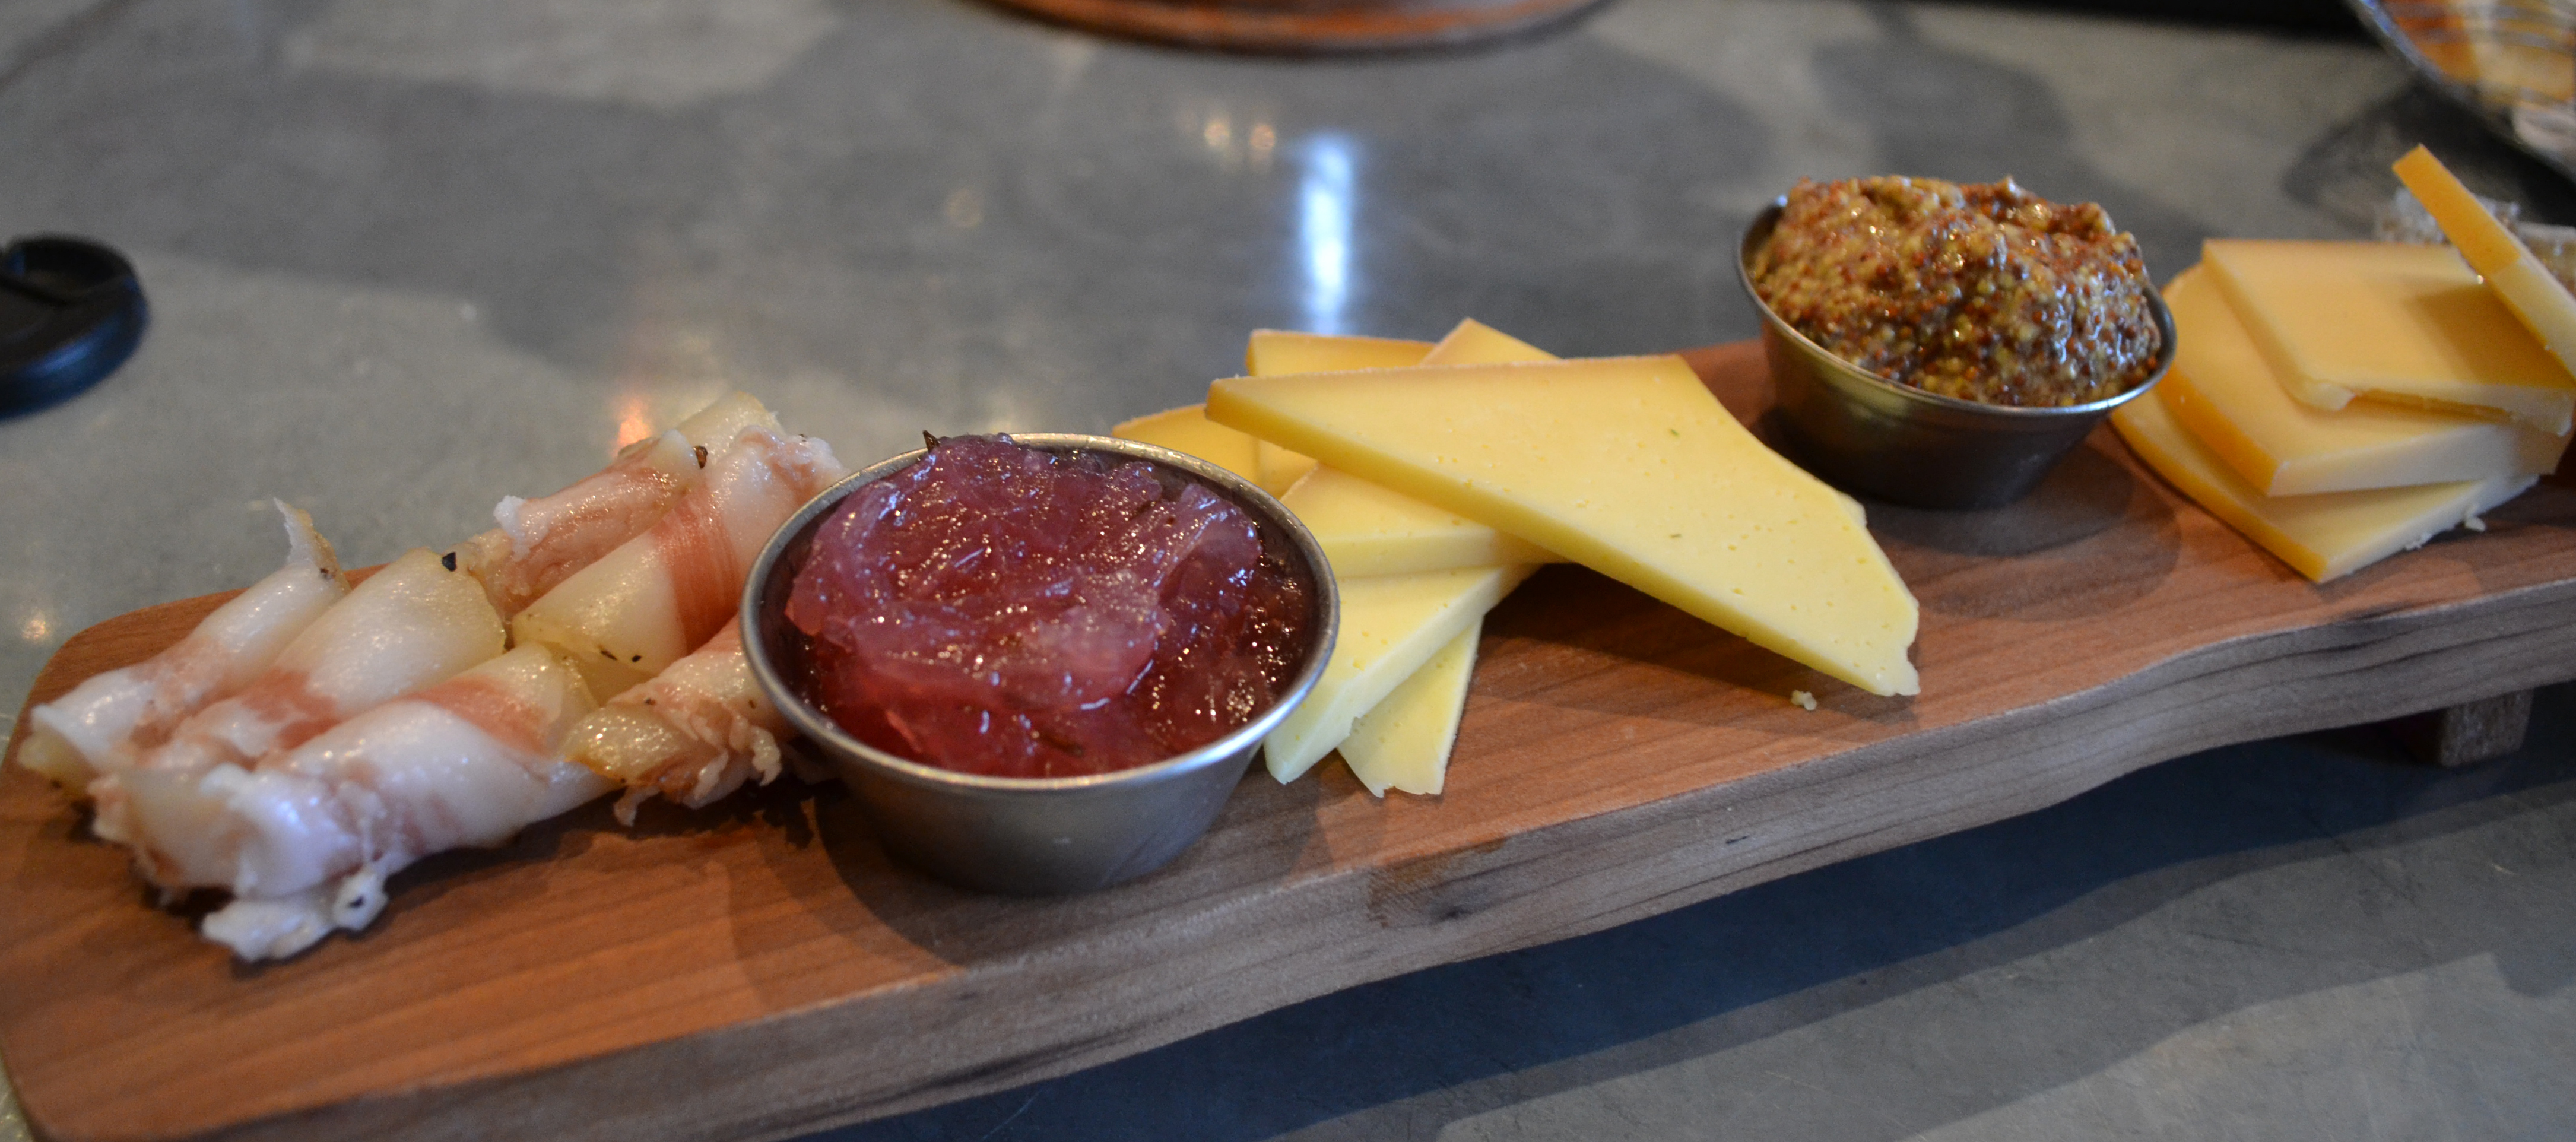 Cheese and charcuterie locally sourced at Le Chien Bistro.